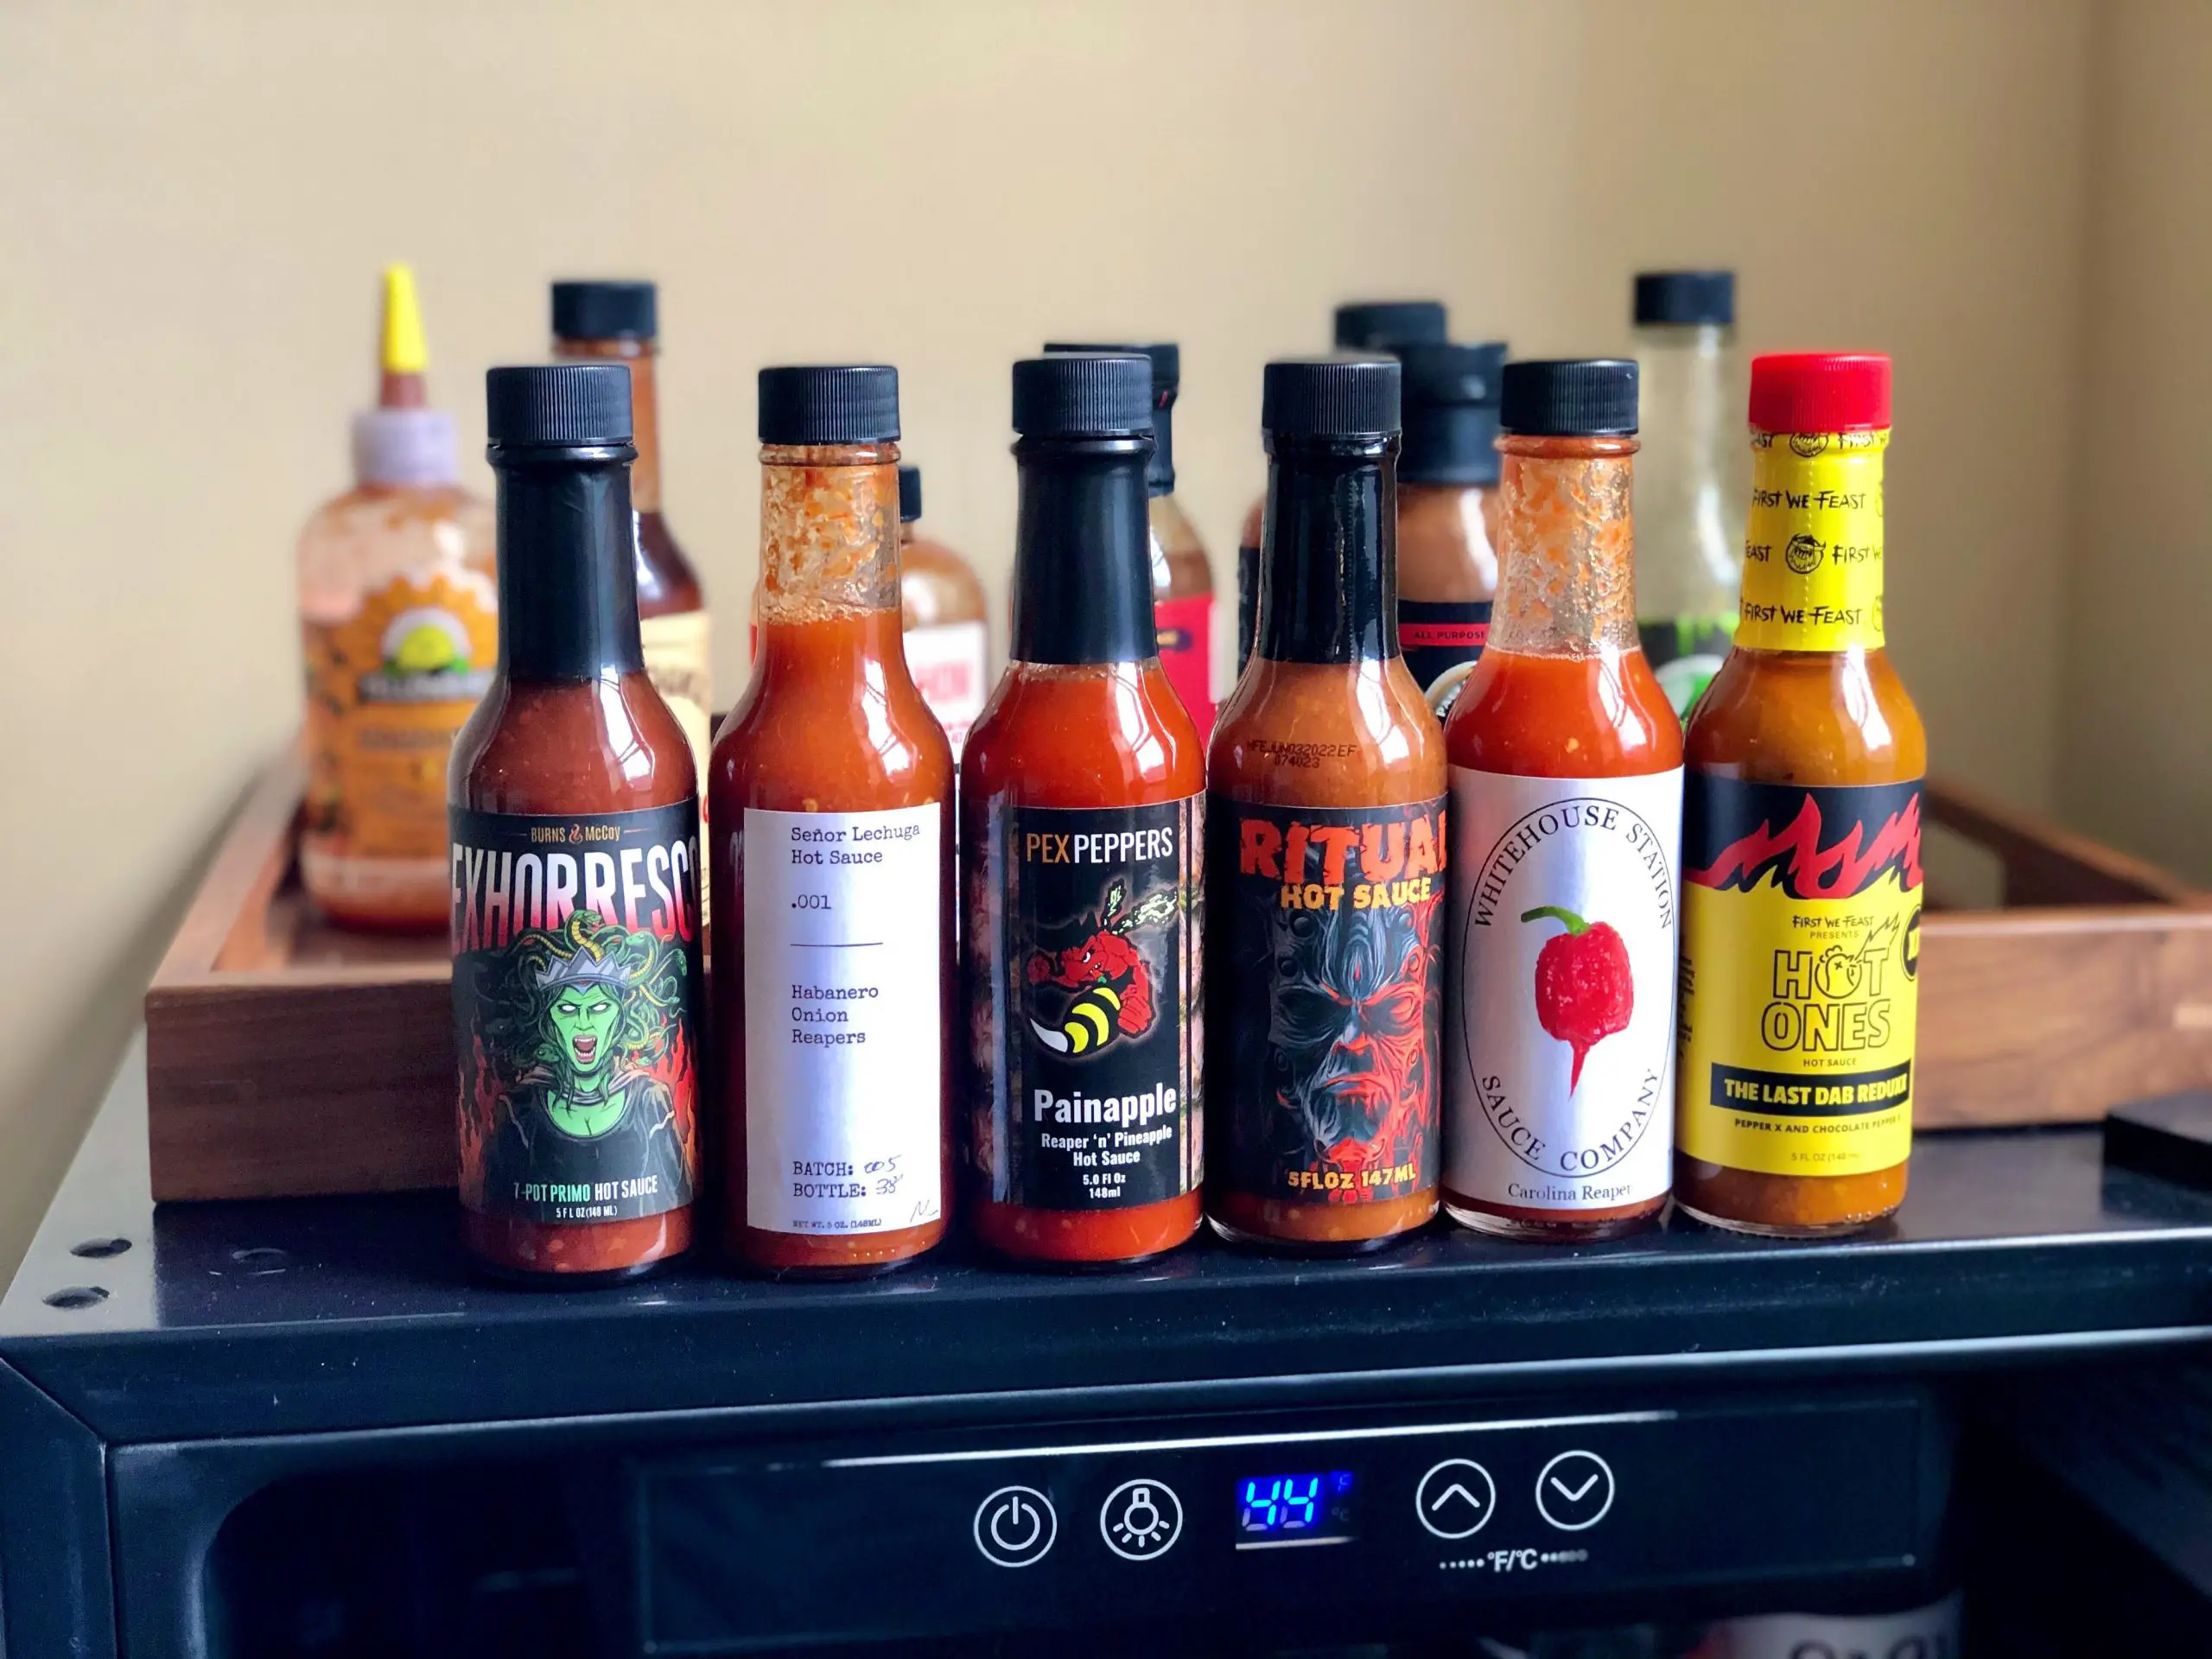 The hottest sauces in our collection : spicy